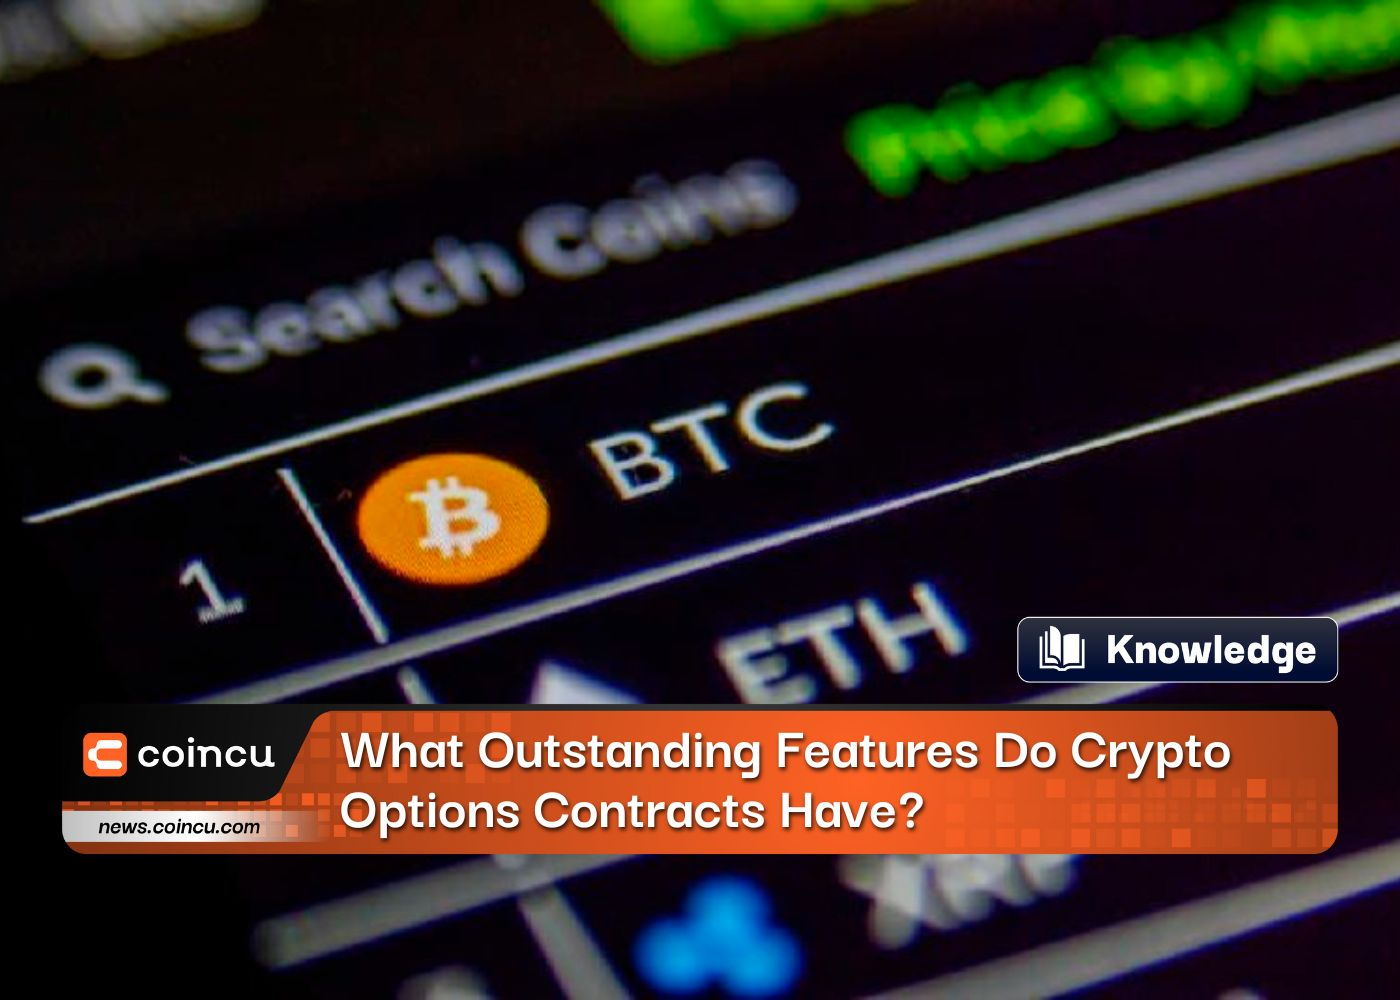 What Outstanding Features Do Crypto Options Contracts Have?